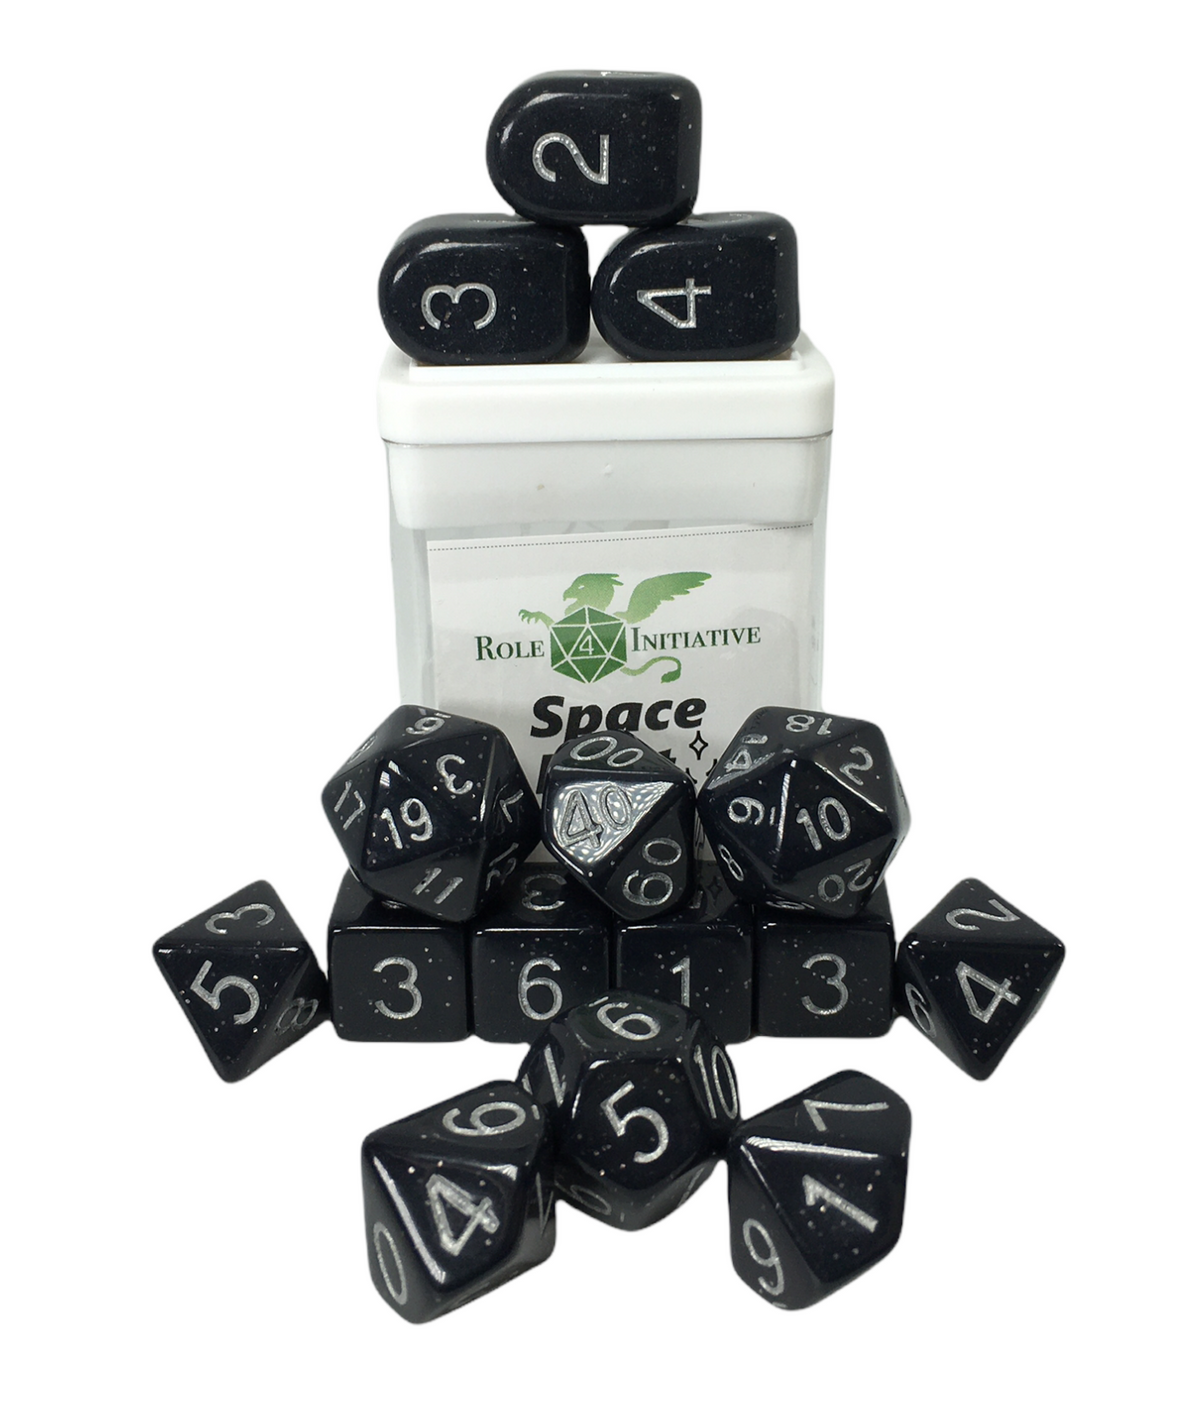 Role 4 Initiative: Polyhedral 15 Dice Set: Space Dust Arch D4 